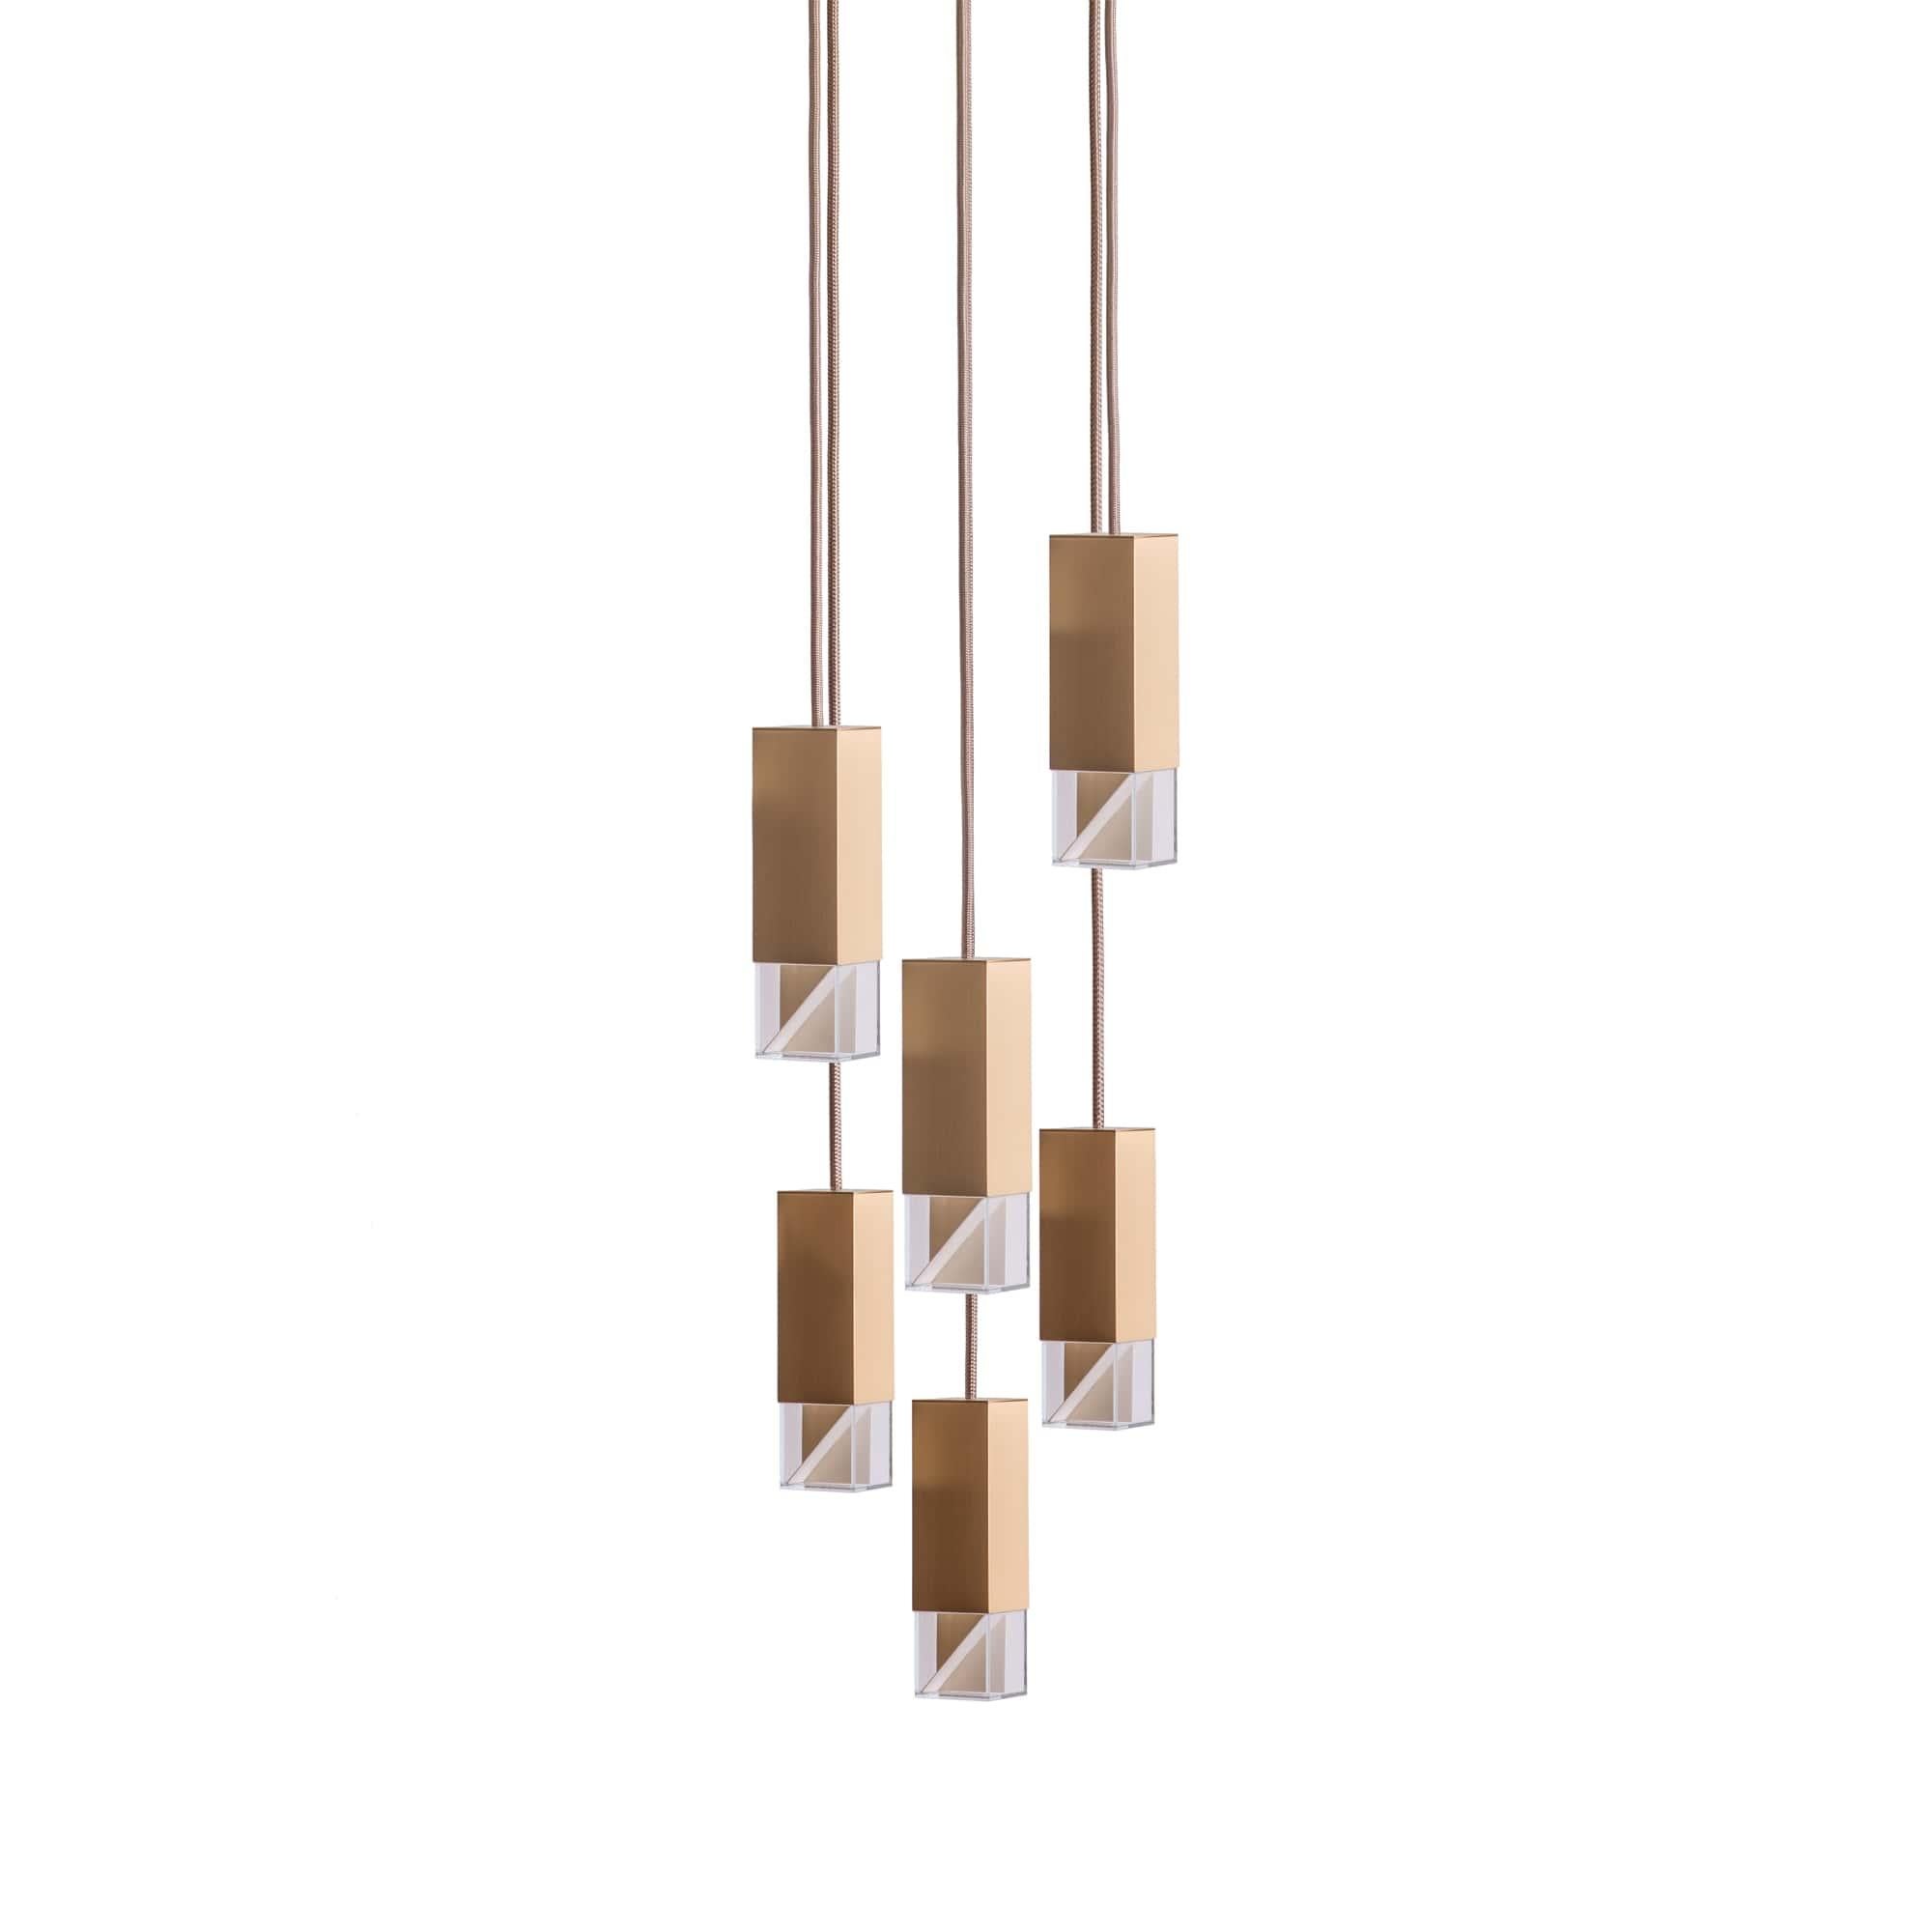 Lamp one 6-light chandelier in nrass by Formaminima
Dimensions: H 93 x 30 x 30 cm
Materials: Lamp body in solid brass, satin finish

Ultra-thin anti-reflection crystal diffuser
Inside-diffuser Limoges biscuit-finish porcelain sheets
Satin